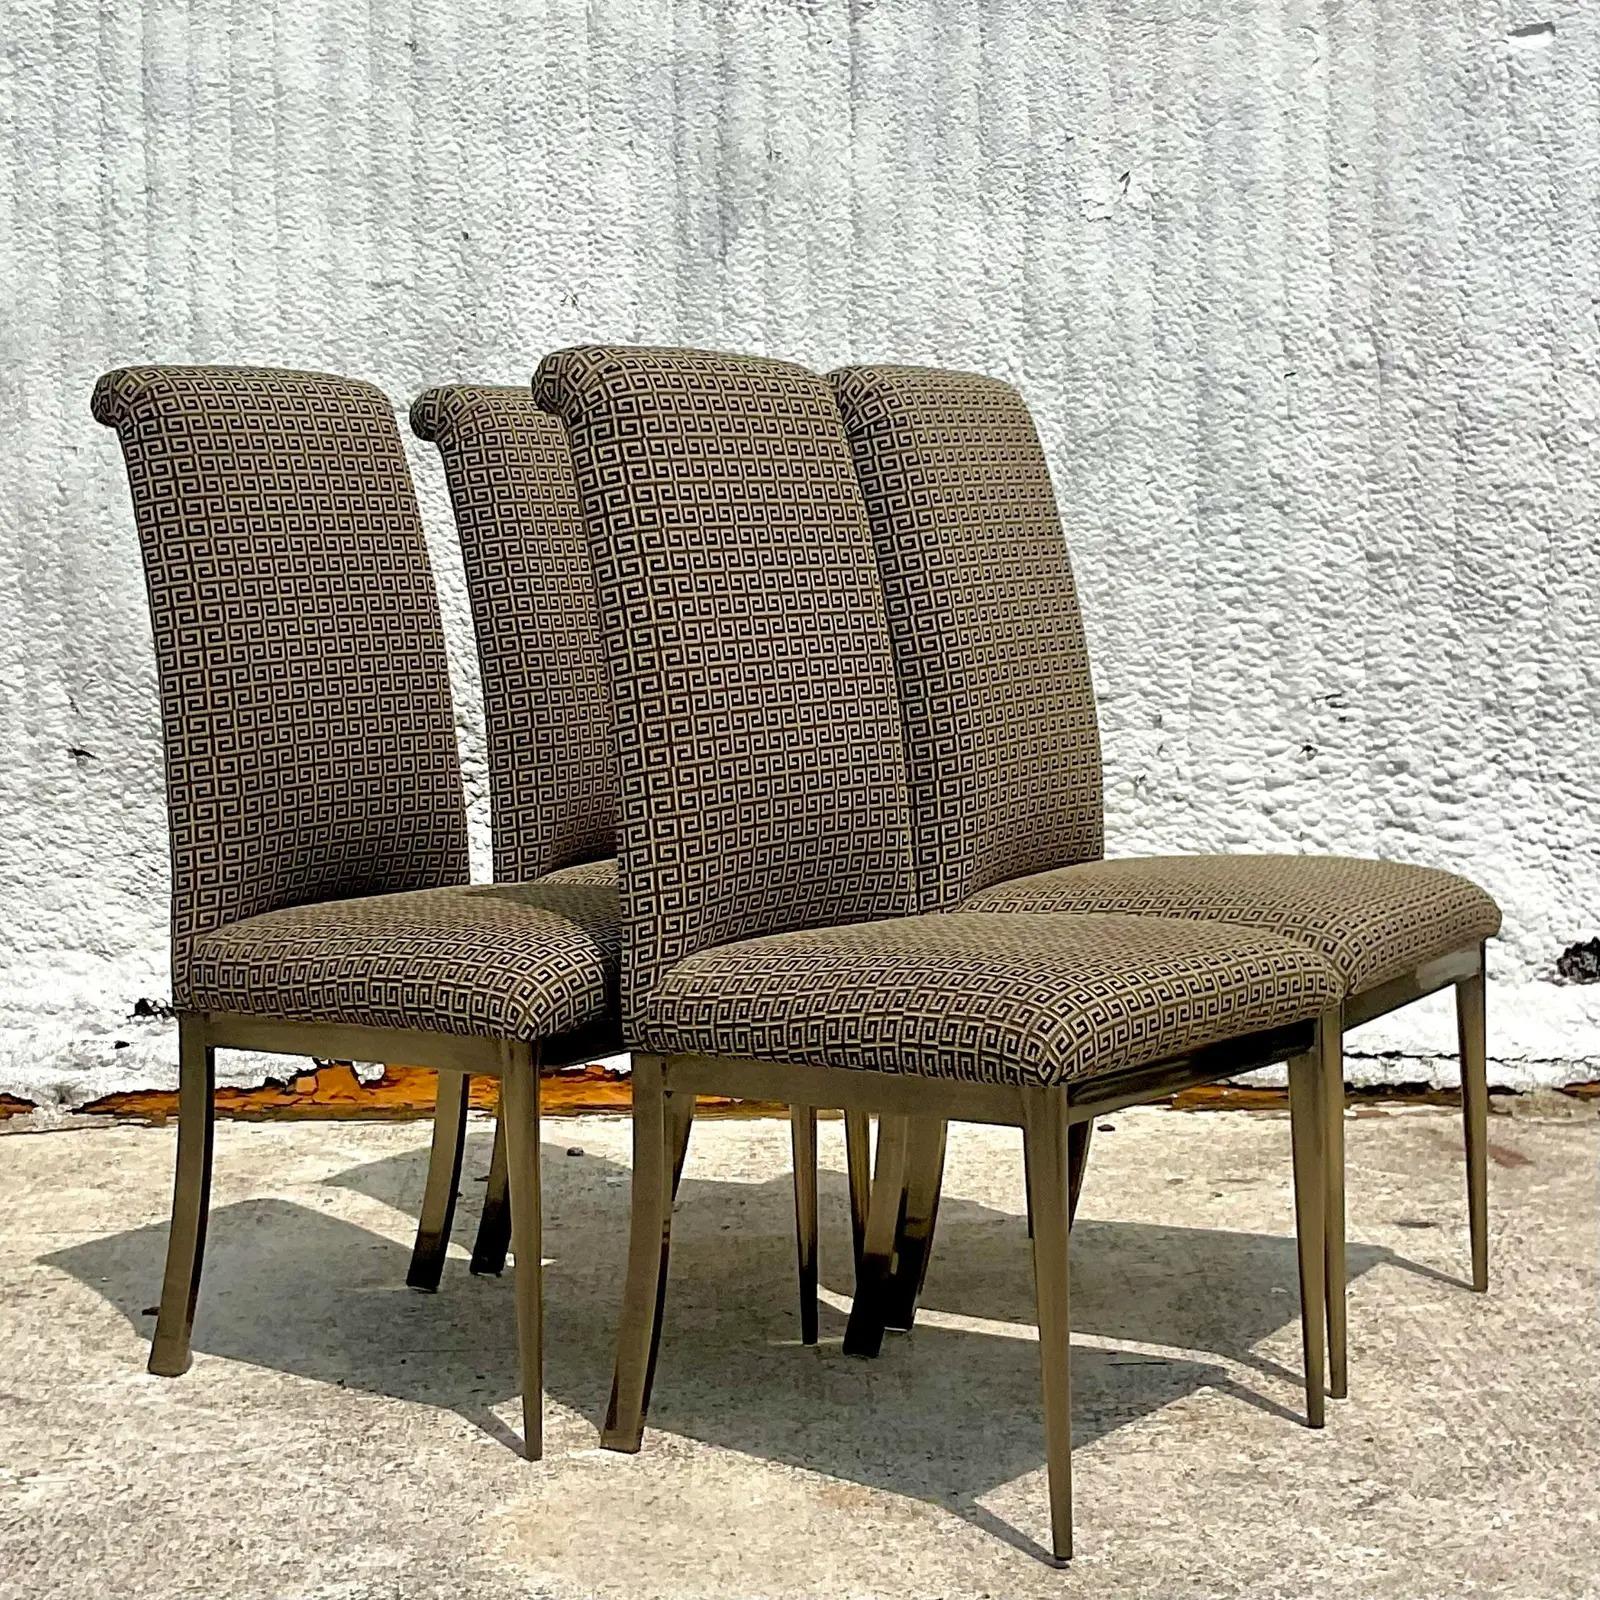 North American Vintage Contemporary Dia Burnished Brass Dining Chairs - Set of 4 For Sale